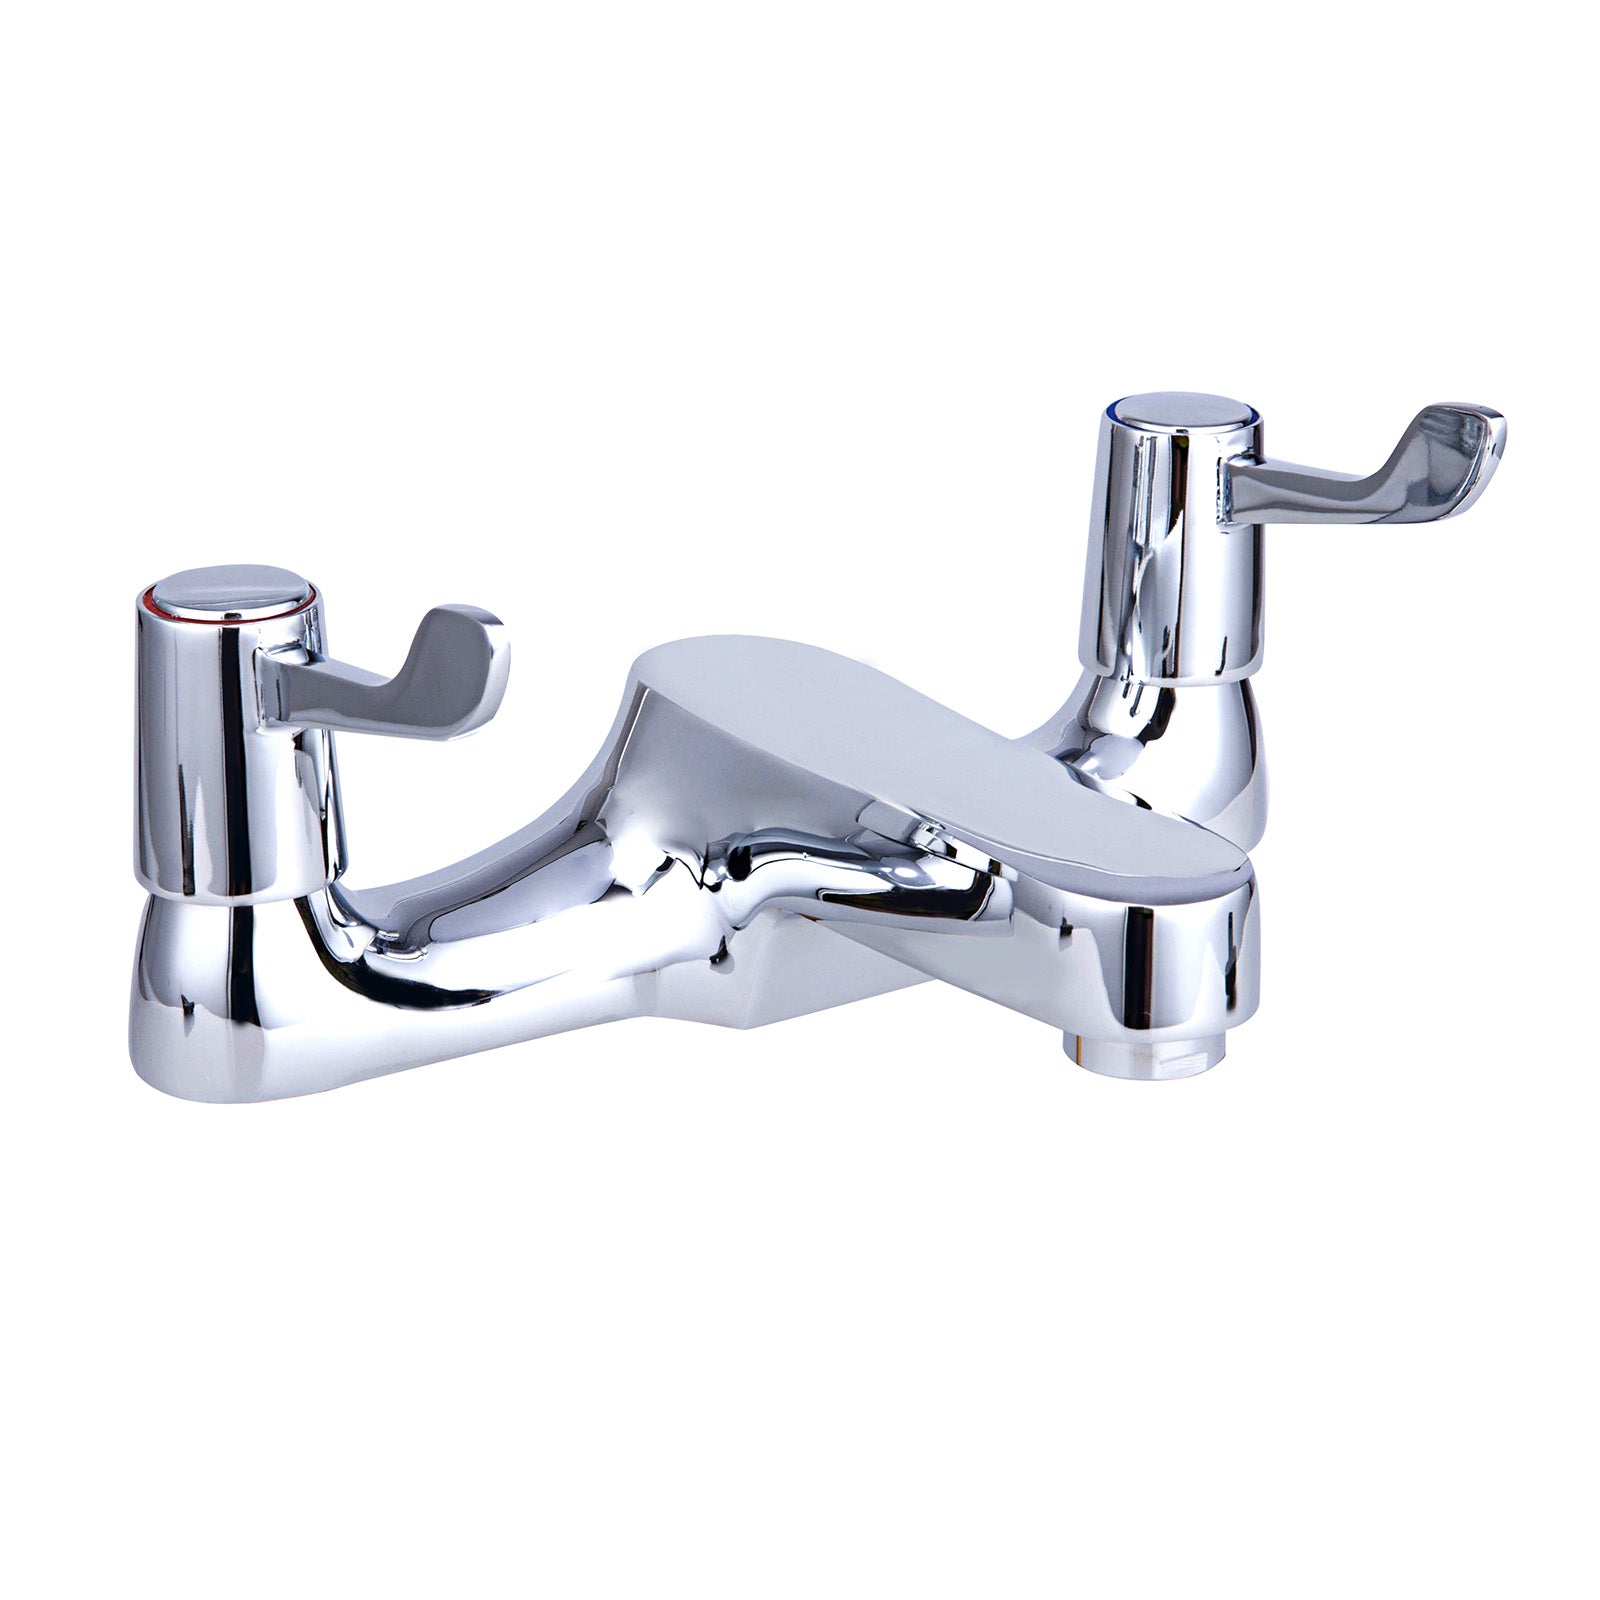 Accessible Chrome Value Lever Bath Filler Tap With 76mm Levers